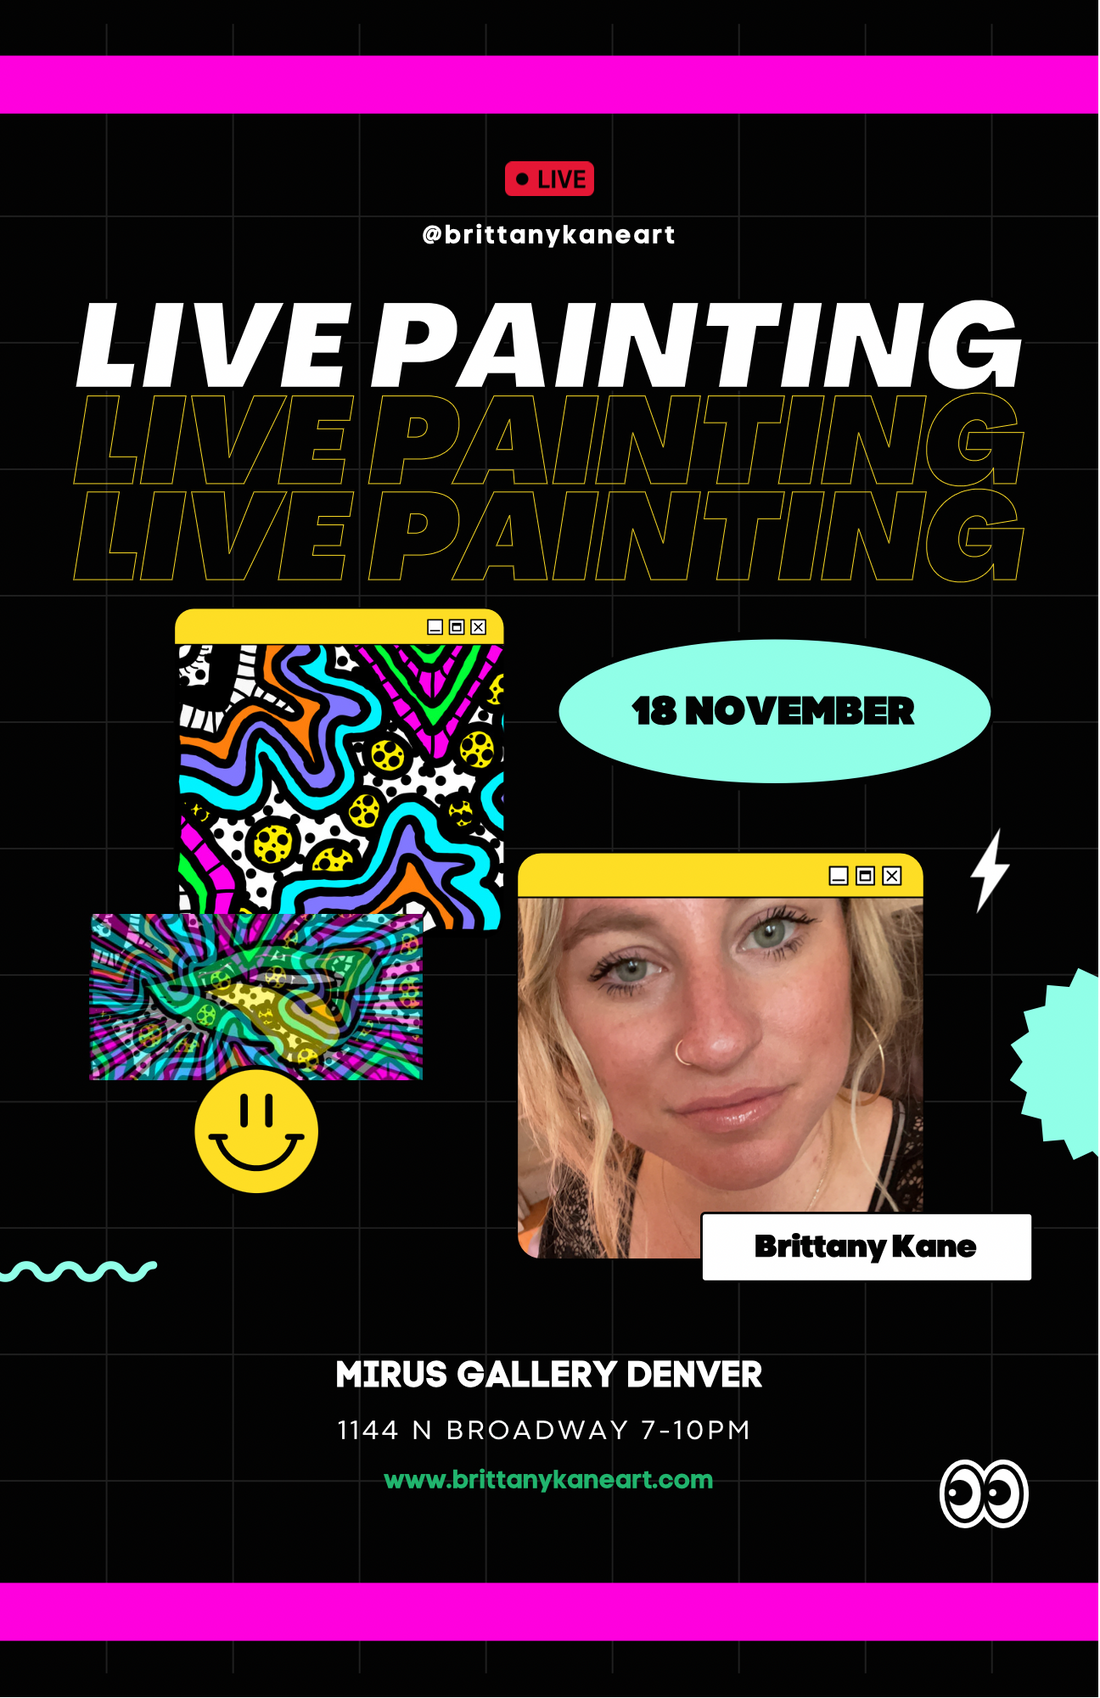 BKA x Mirus Gallery Live Painting 11/18 7-10pm